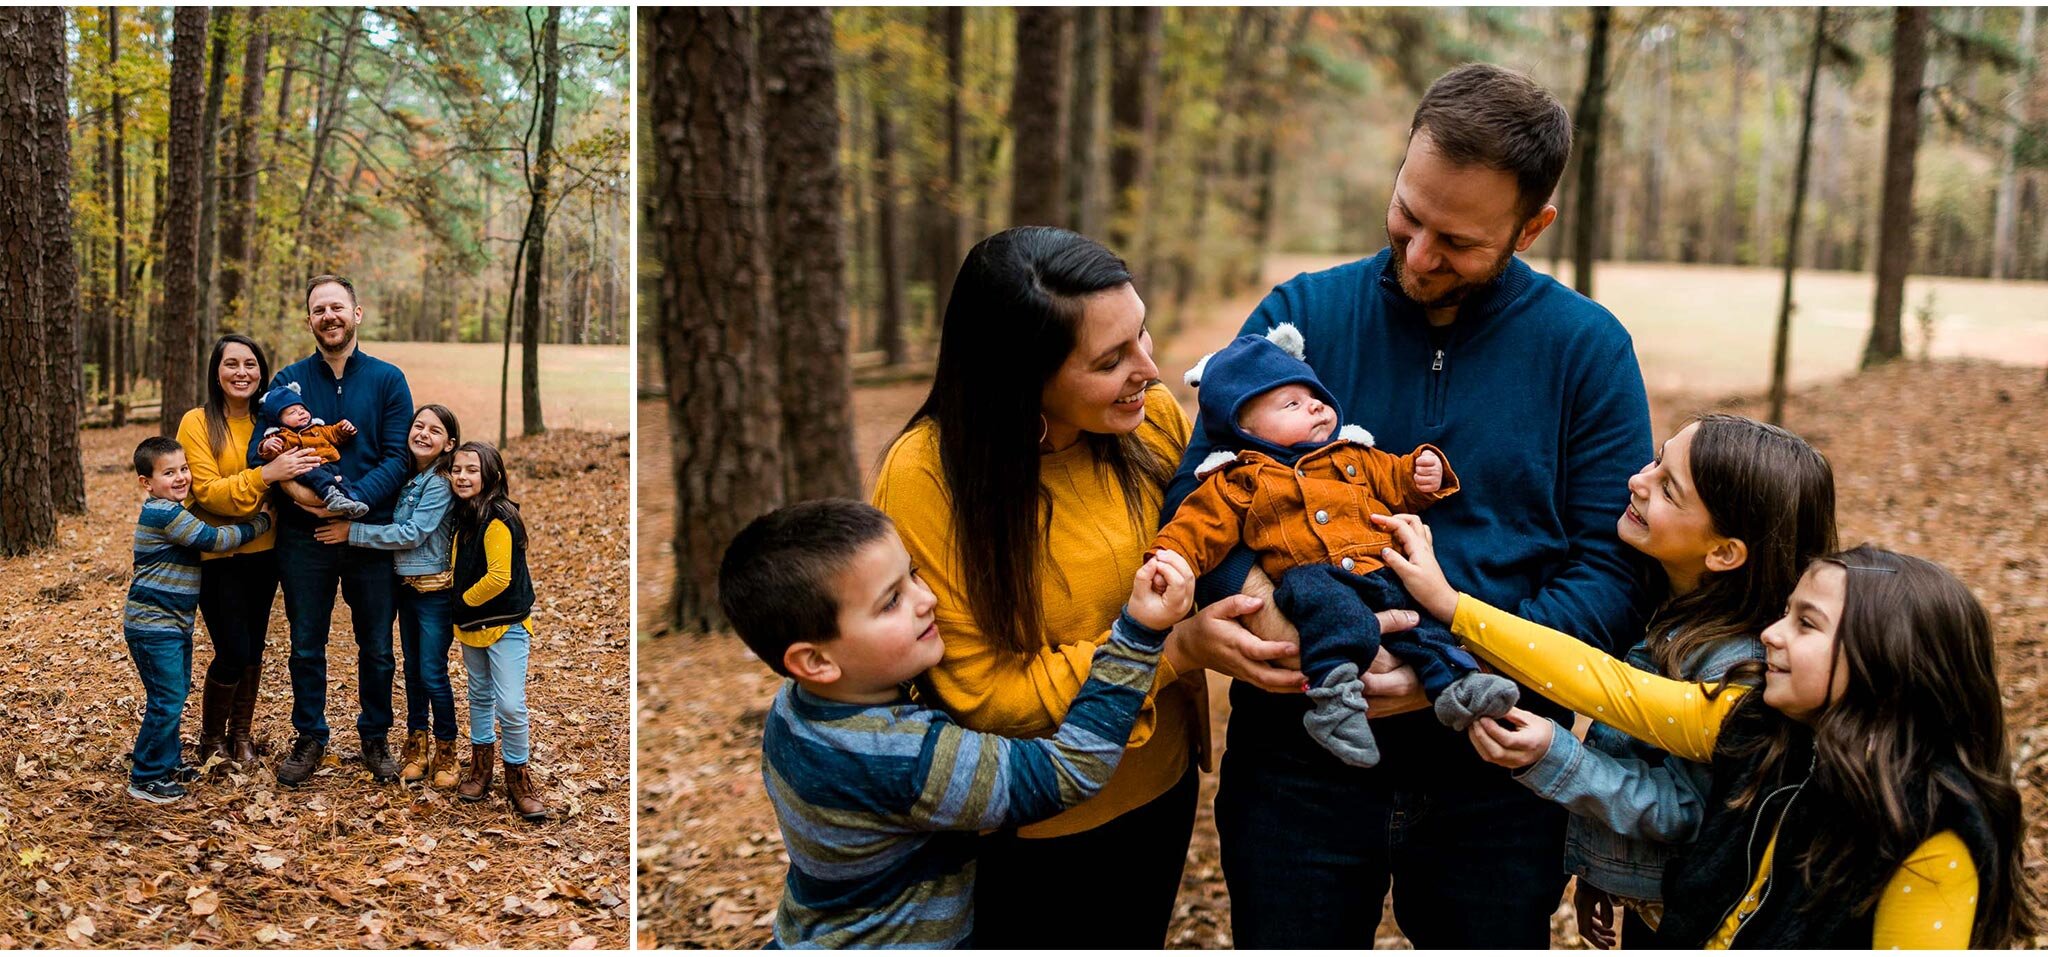 Raleigh Family Photographer | By G. Lin Photography | Fall Family photos at Umstead Park